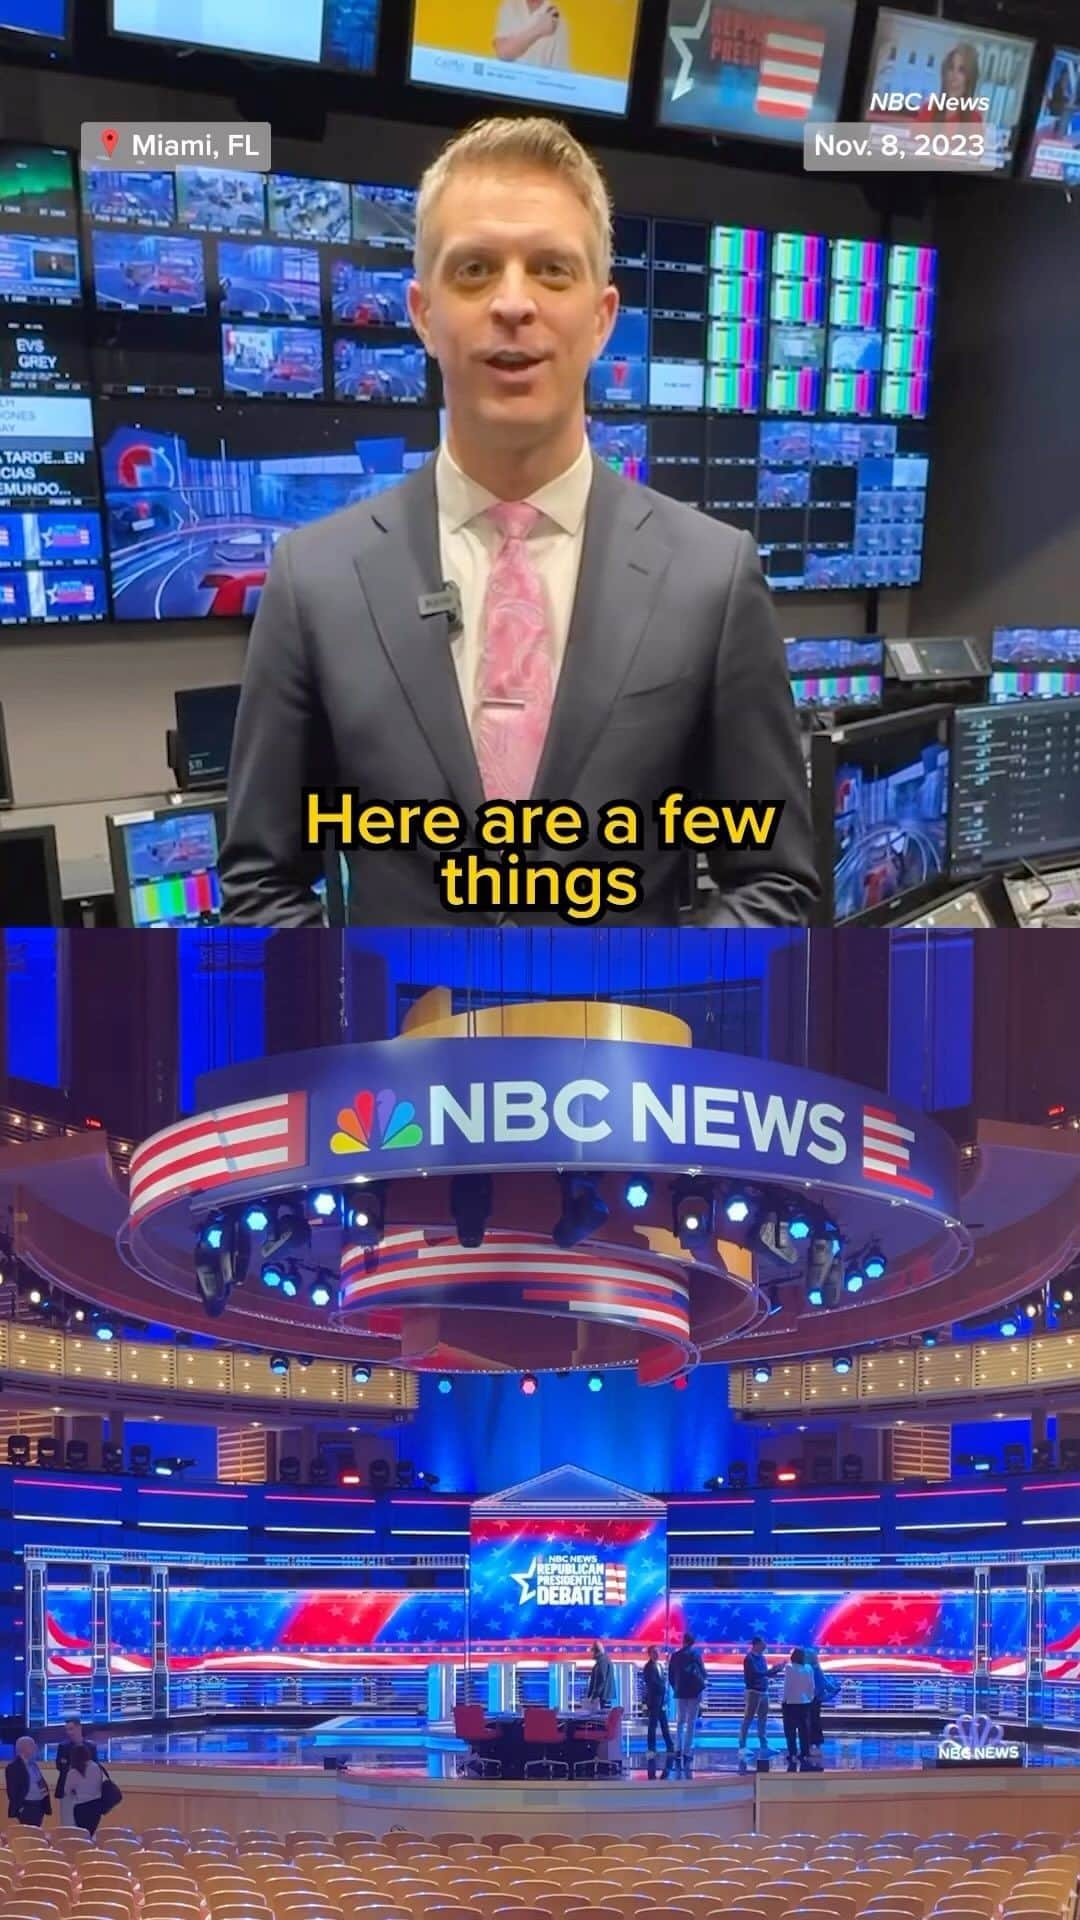 NBC Newsのインスタグラム：「Light signals, note-taking and absolutely no coaching: Garrett Haake breaks down the rules for @NBCNews’ Republican presidential debate.」